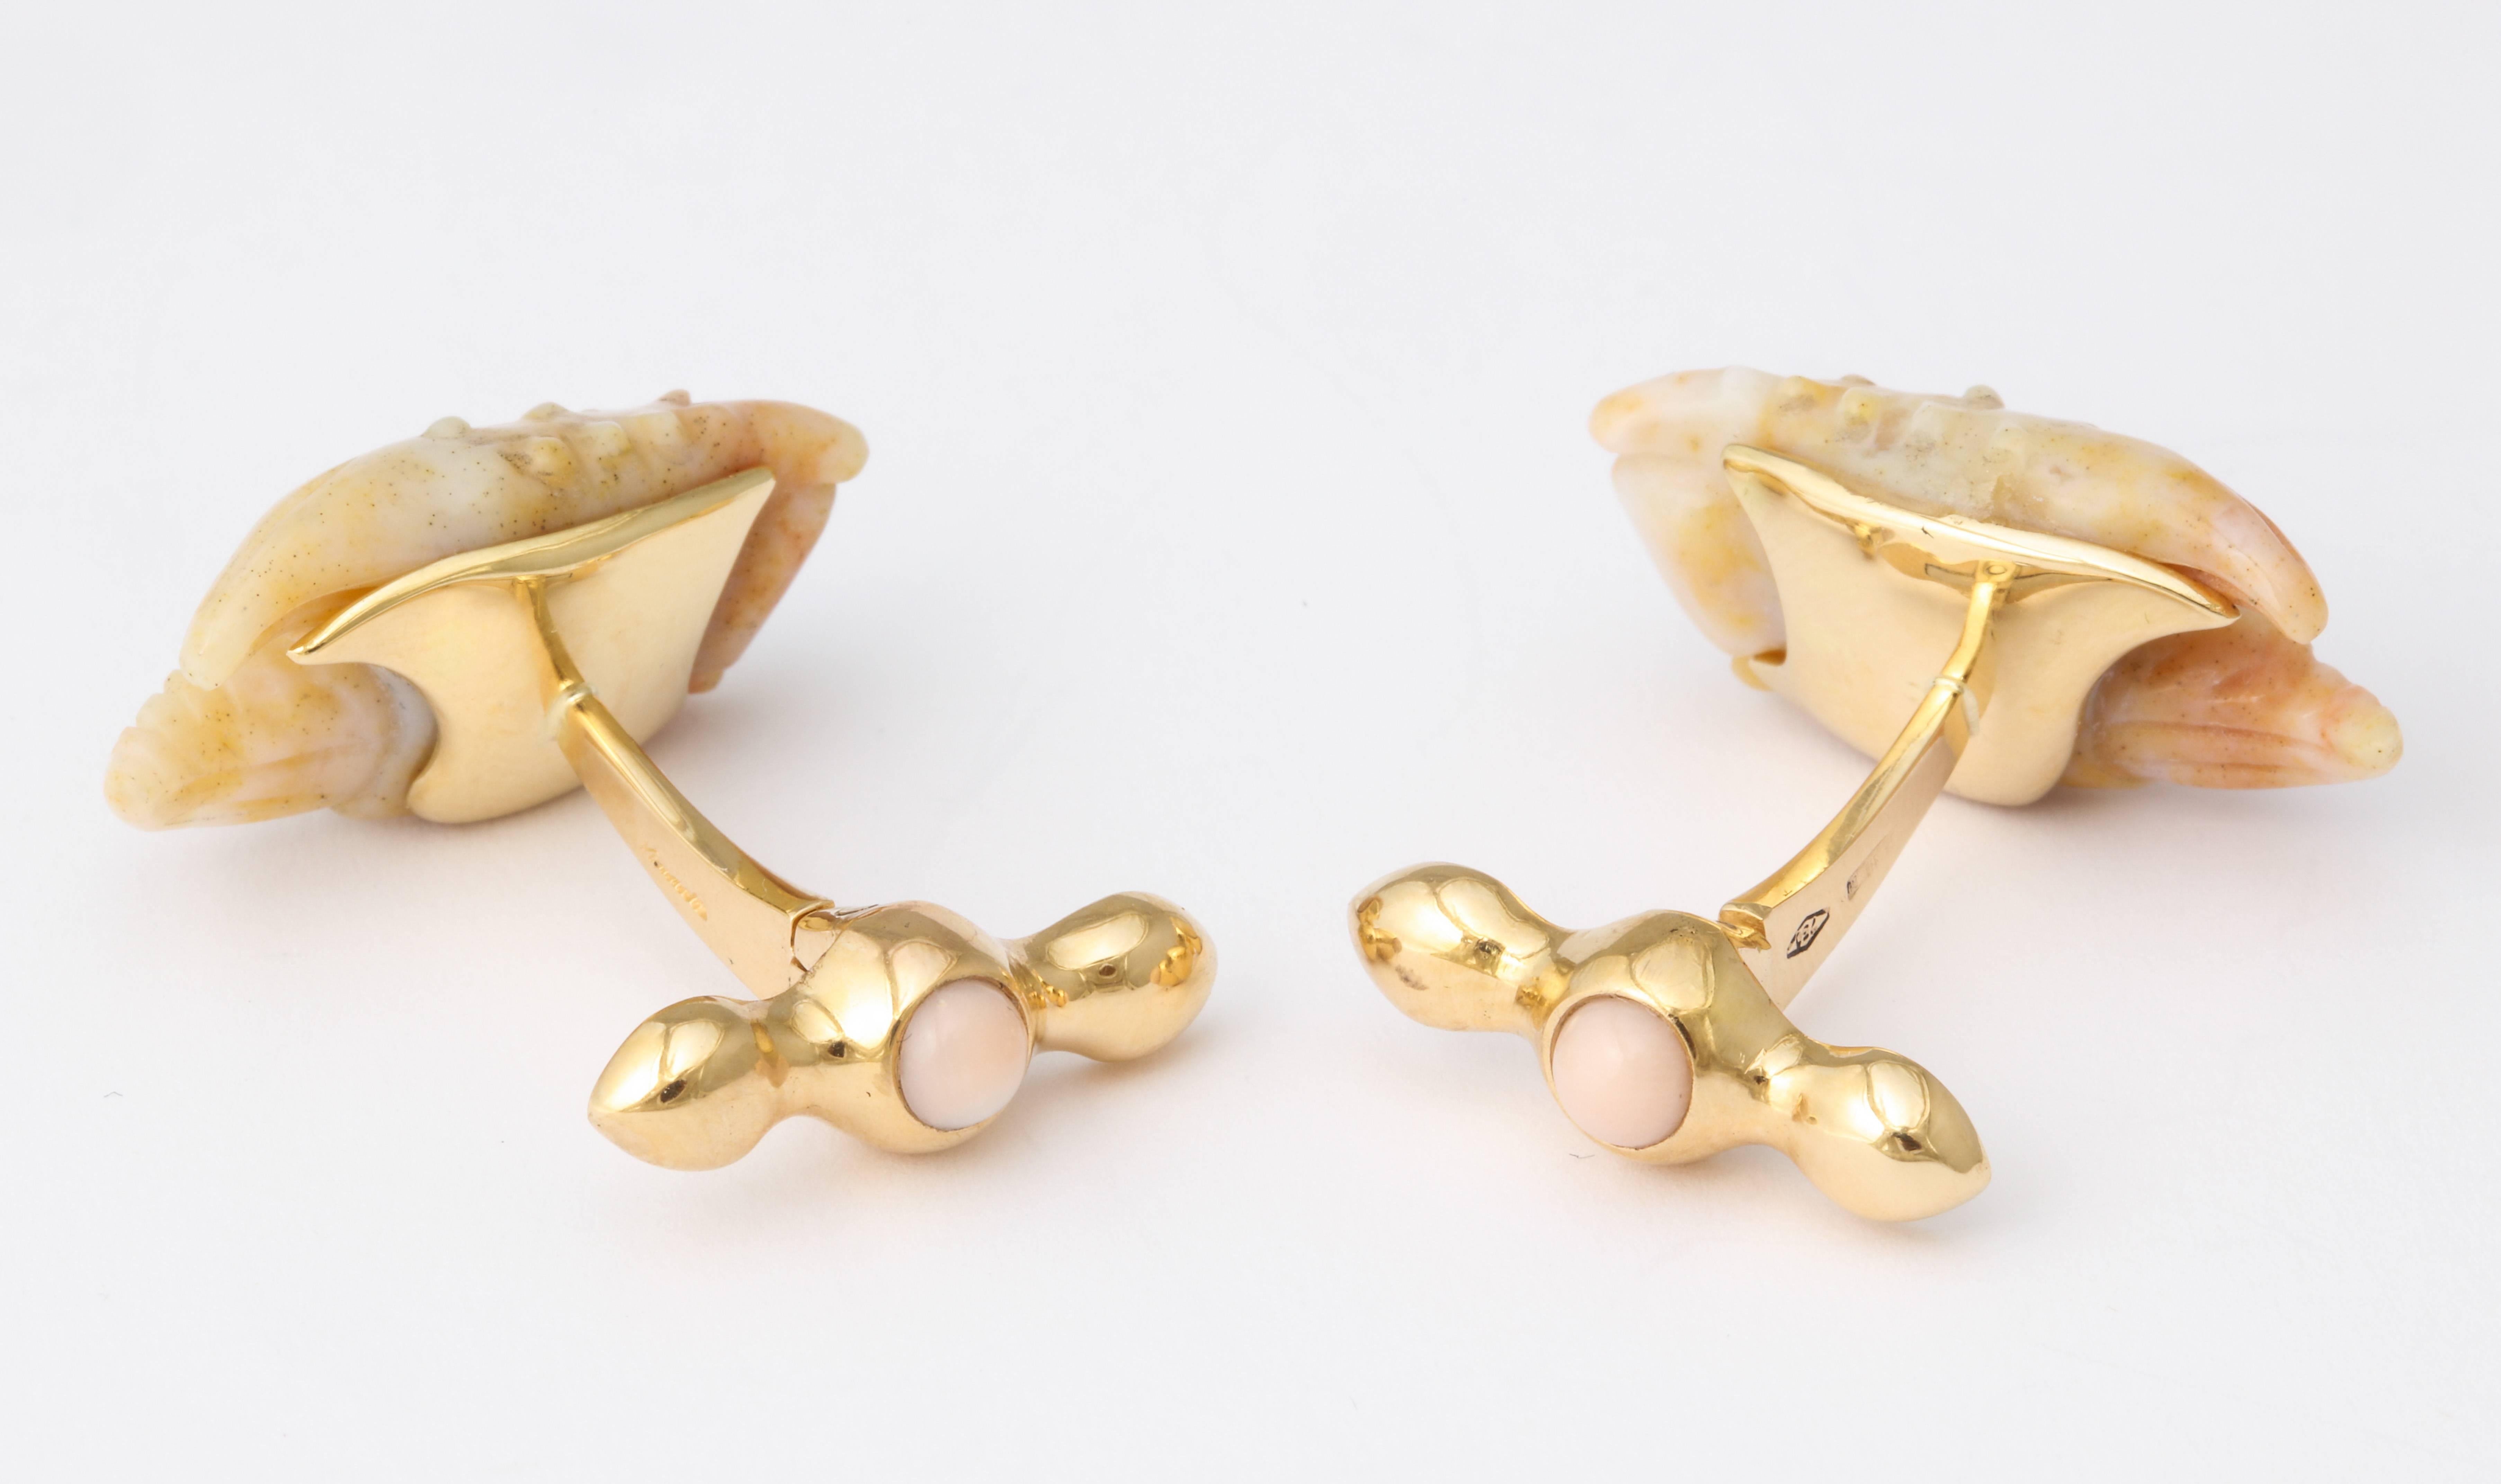 Mixed Cut Michael Kanners Stone Crab Claw Cufflinks